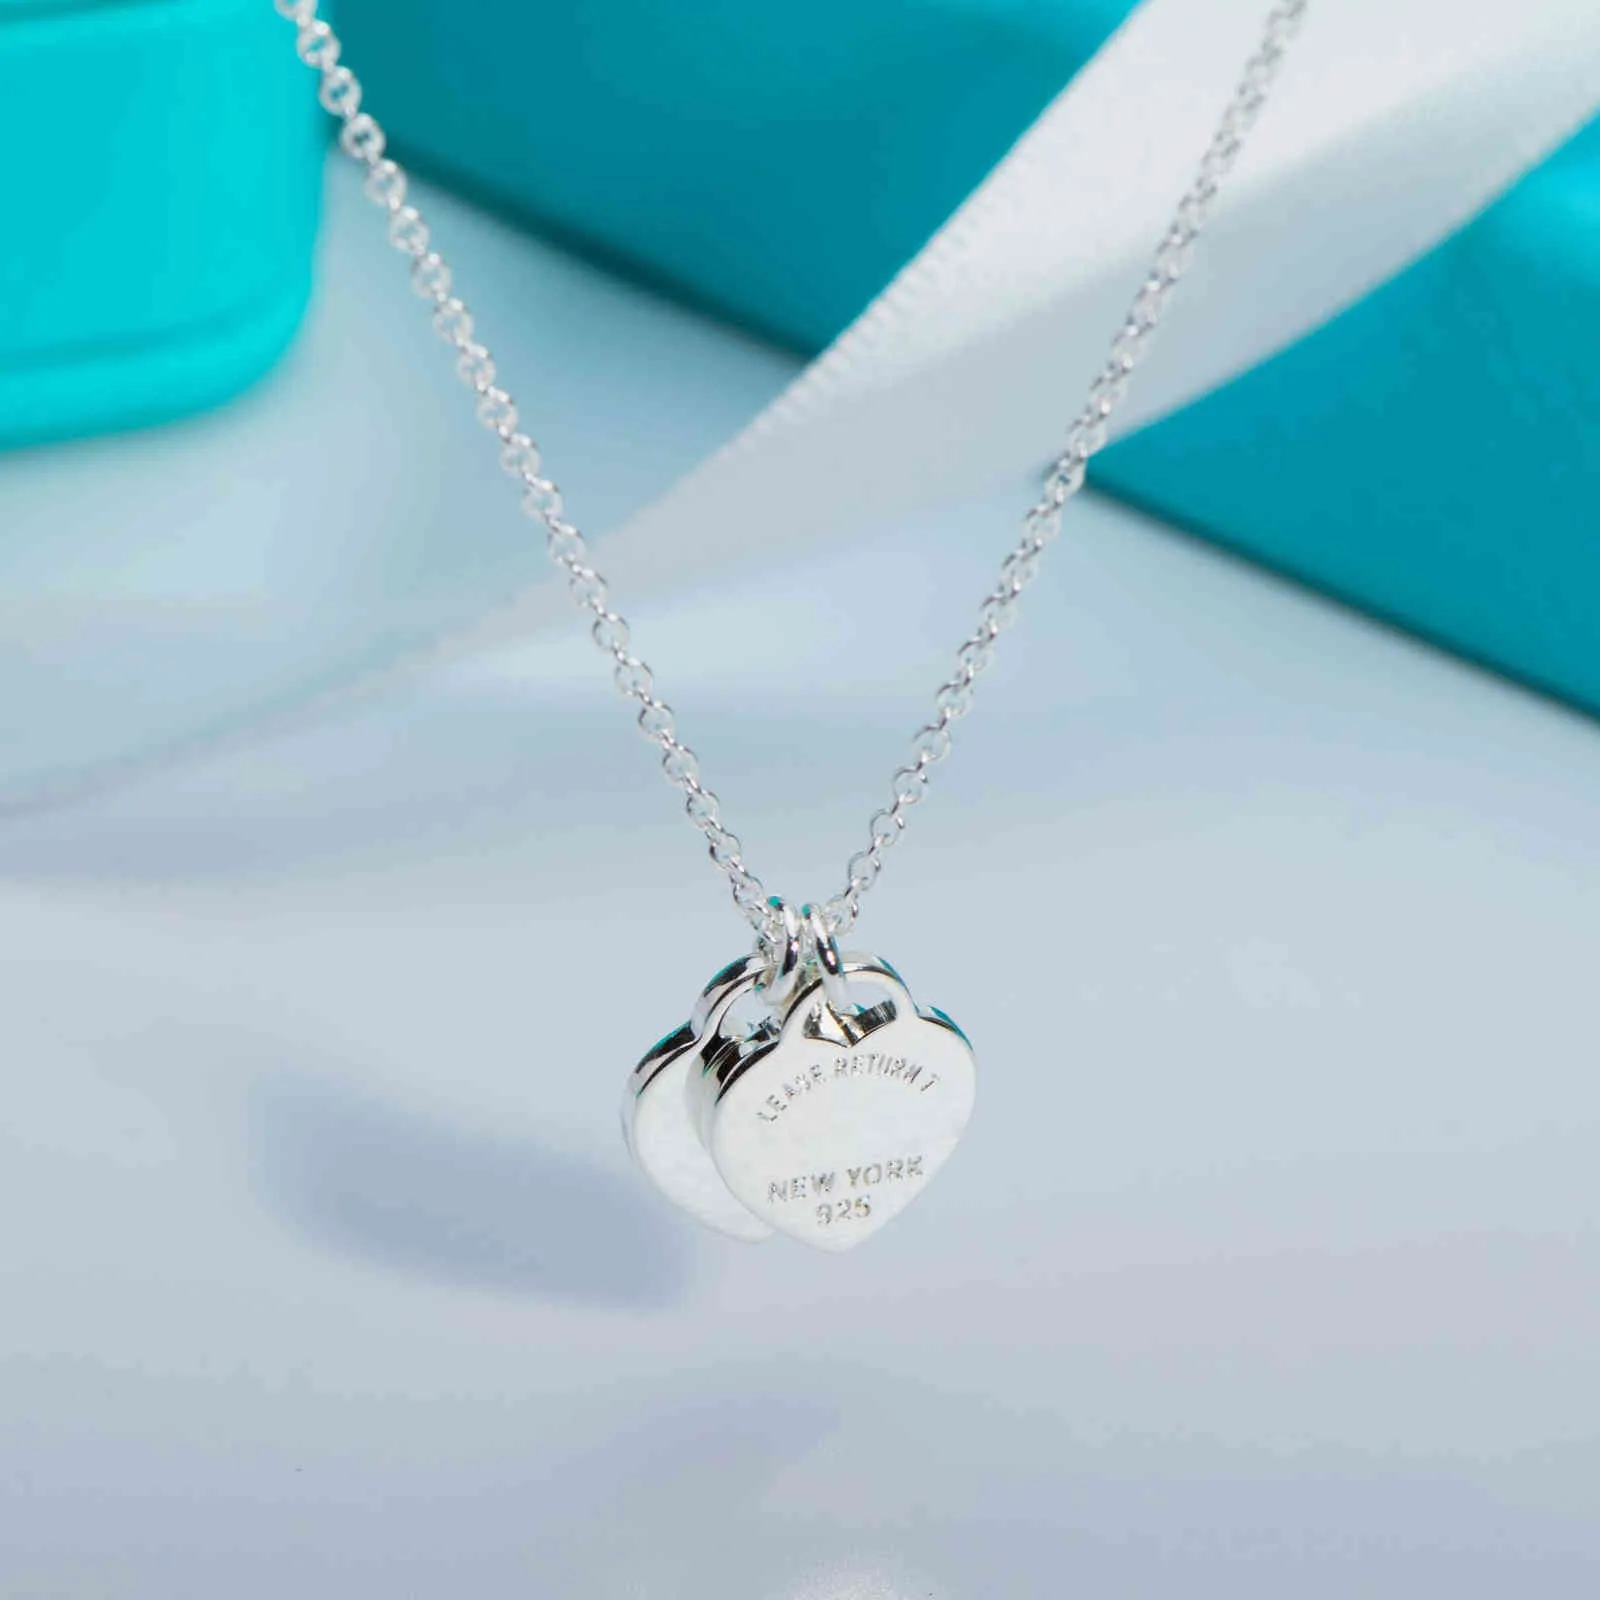 blue gift box Lover Necklace 925 silver pendant necklaces female jewelry Tif exquisite craftsmanship with official logo classic heart Luxury designer Bracelets